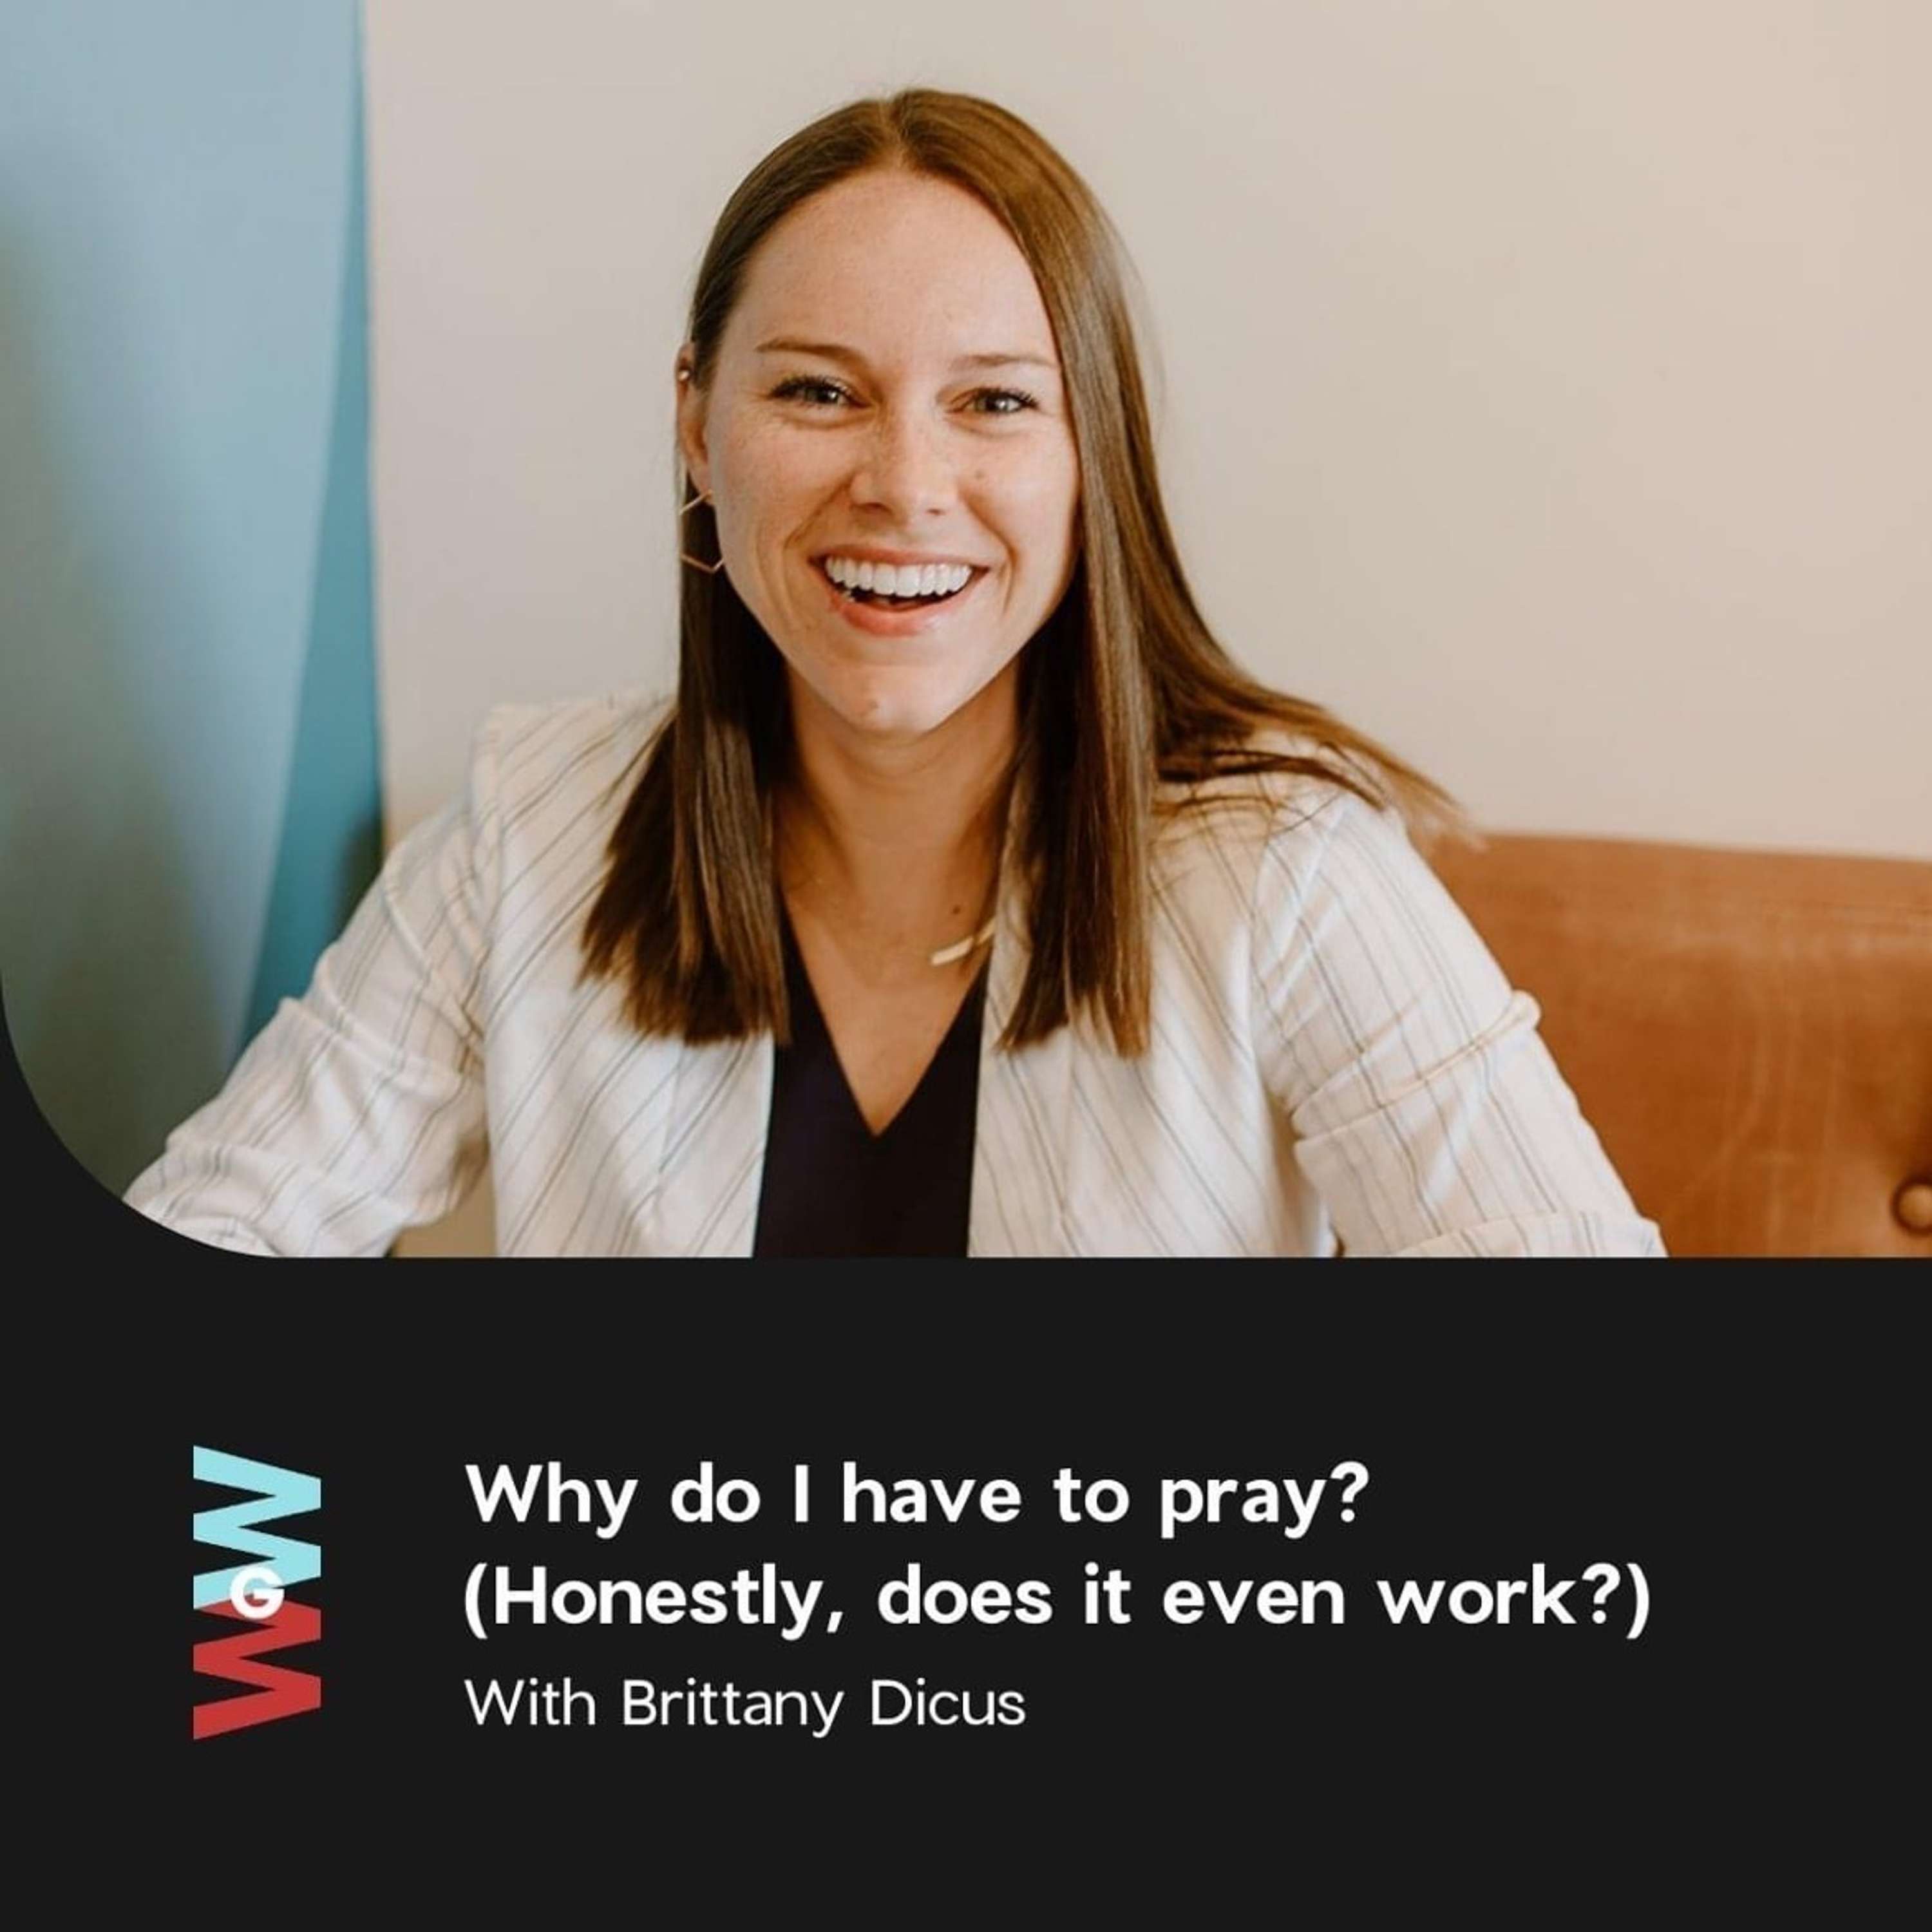 Brittany Dicus - Why do I have to pray? (Honestly, does it even work?)